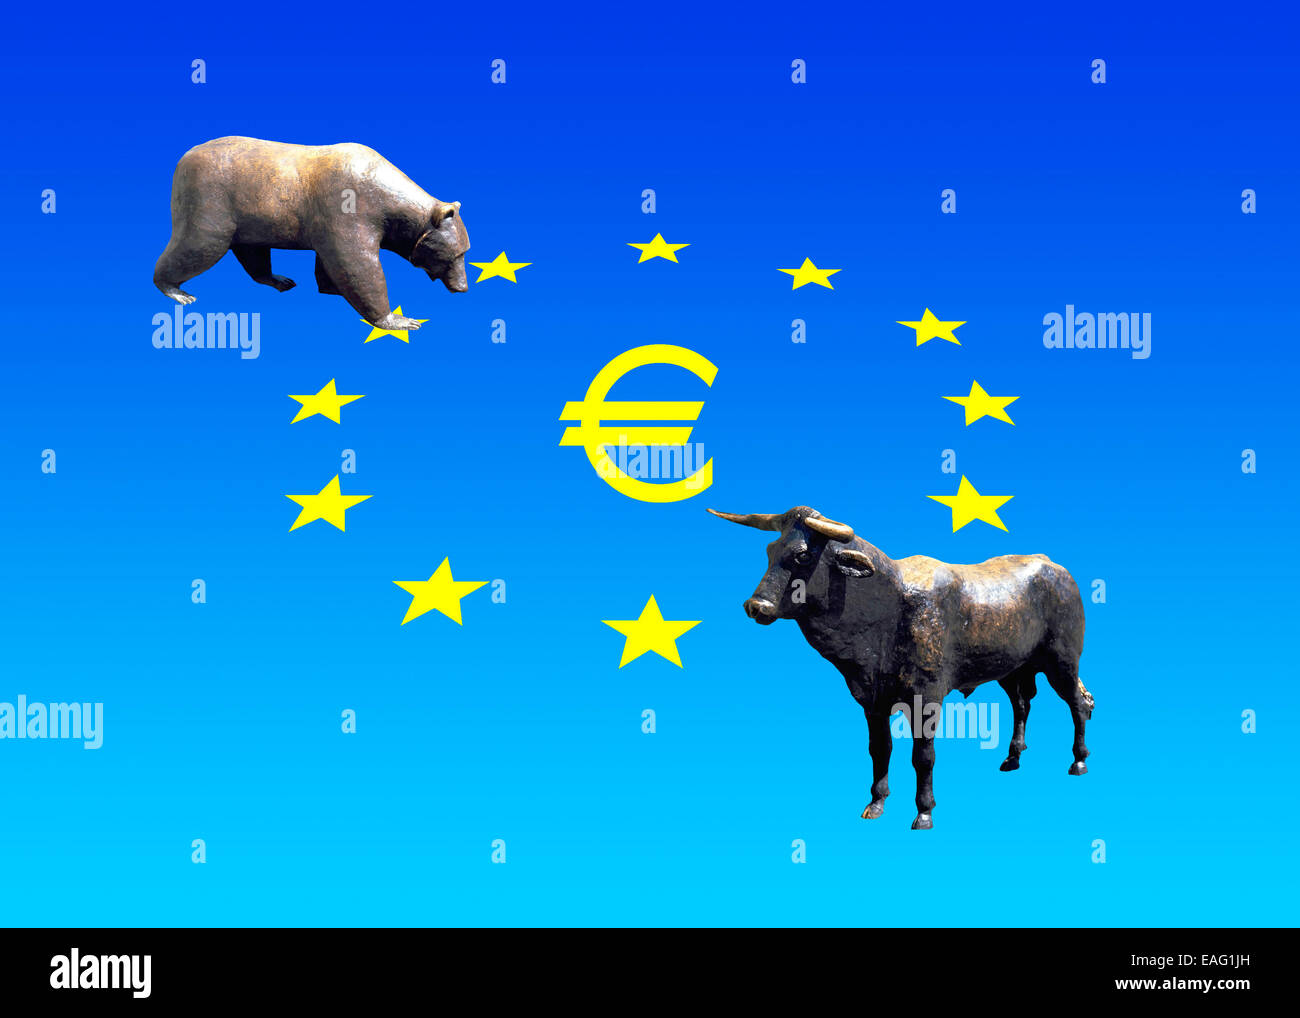 Bull and Bear before the 12 foundet Euro Stars Stock Photo